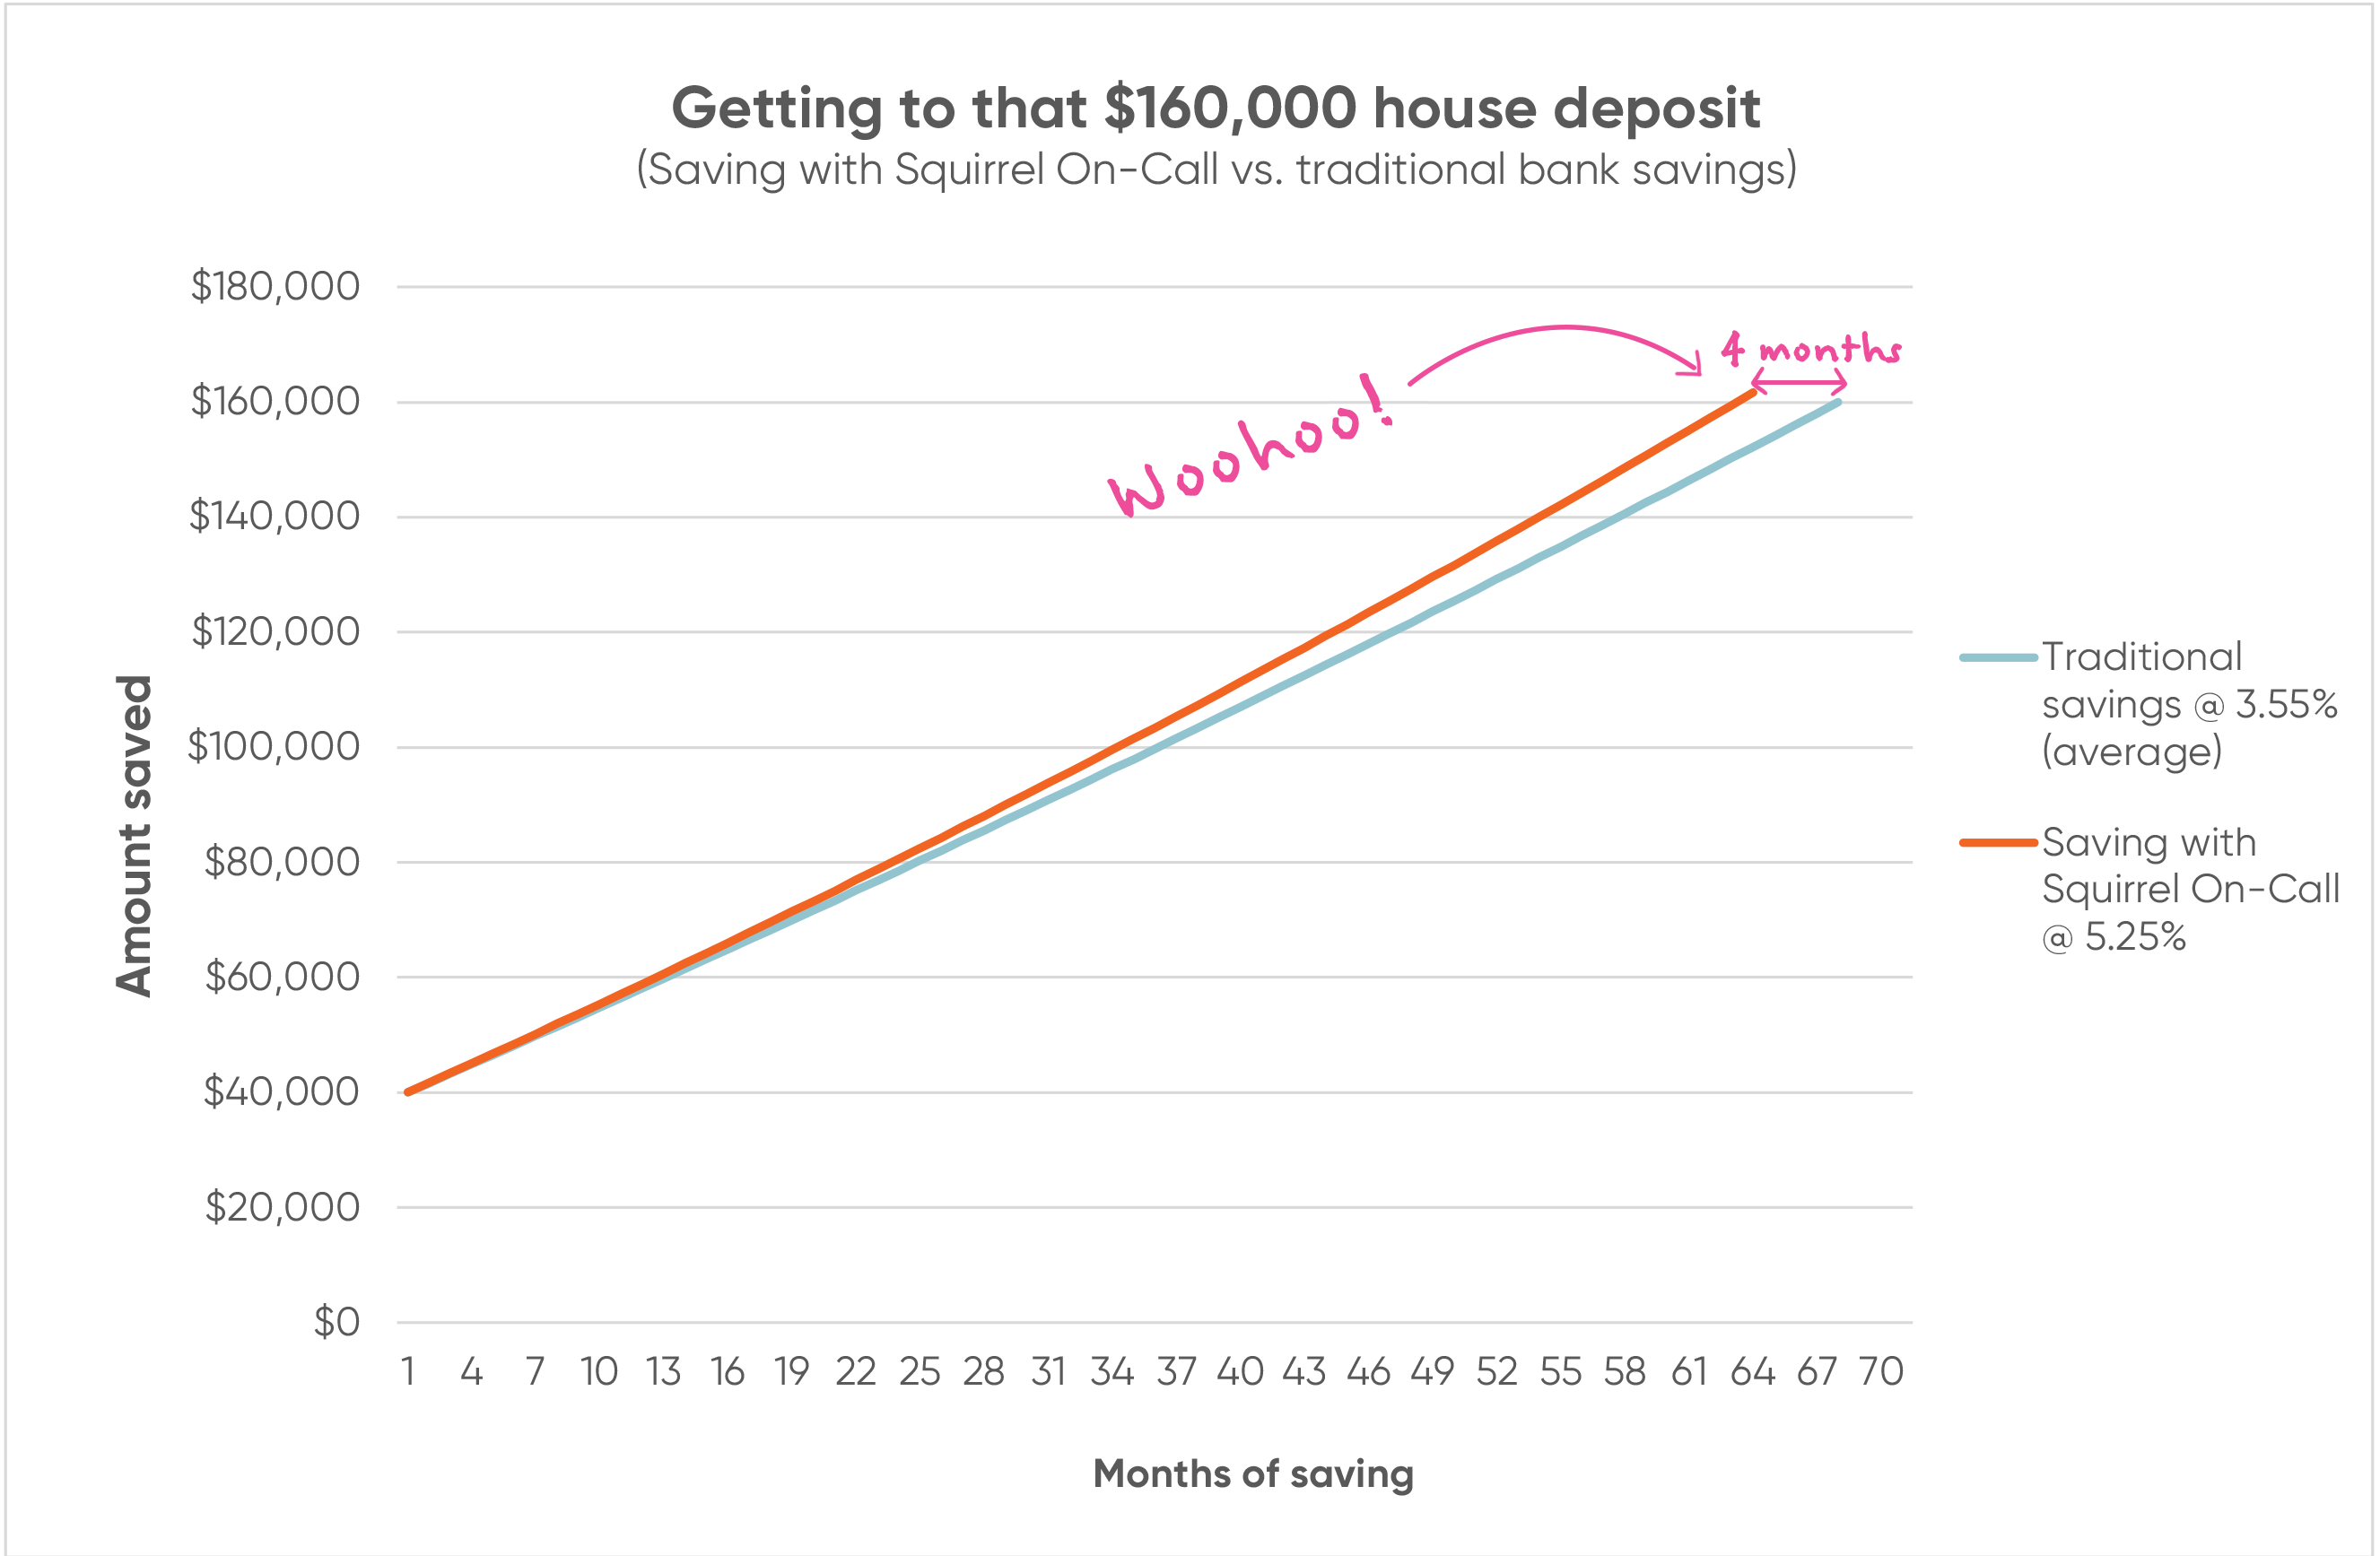 Graph tracking time taken to save a house deposit with Squirrel on-call account vs. traditional savings